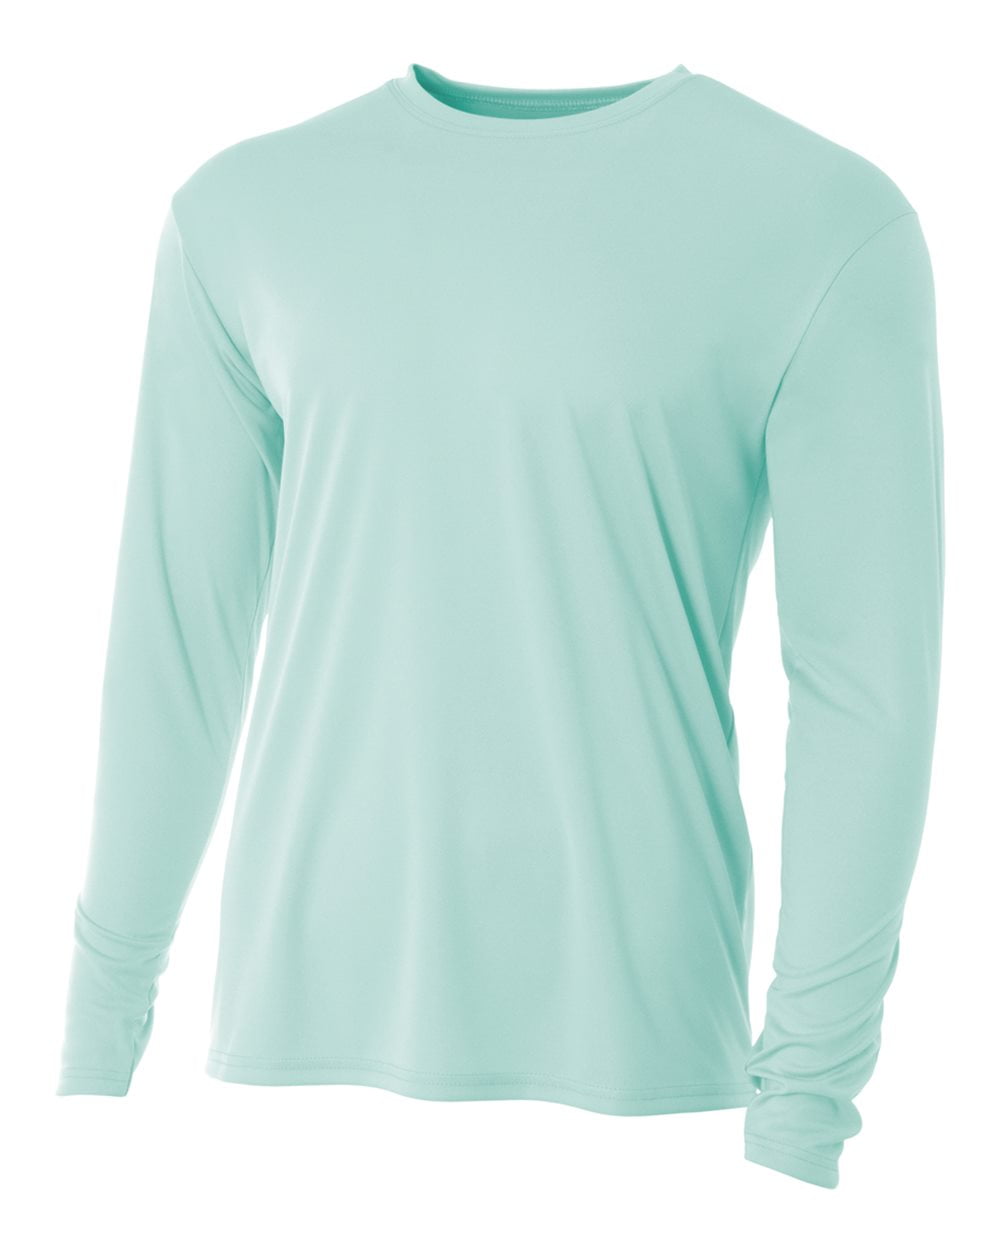 A4 Mens Adult Cooling Active Performance Crew Neck Long Sleeve T-Shirt ,  PASTEL MINT , Large, N3165